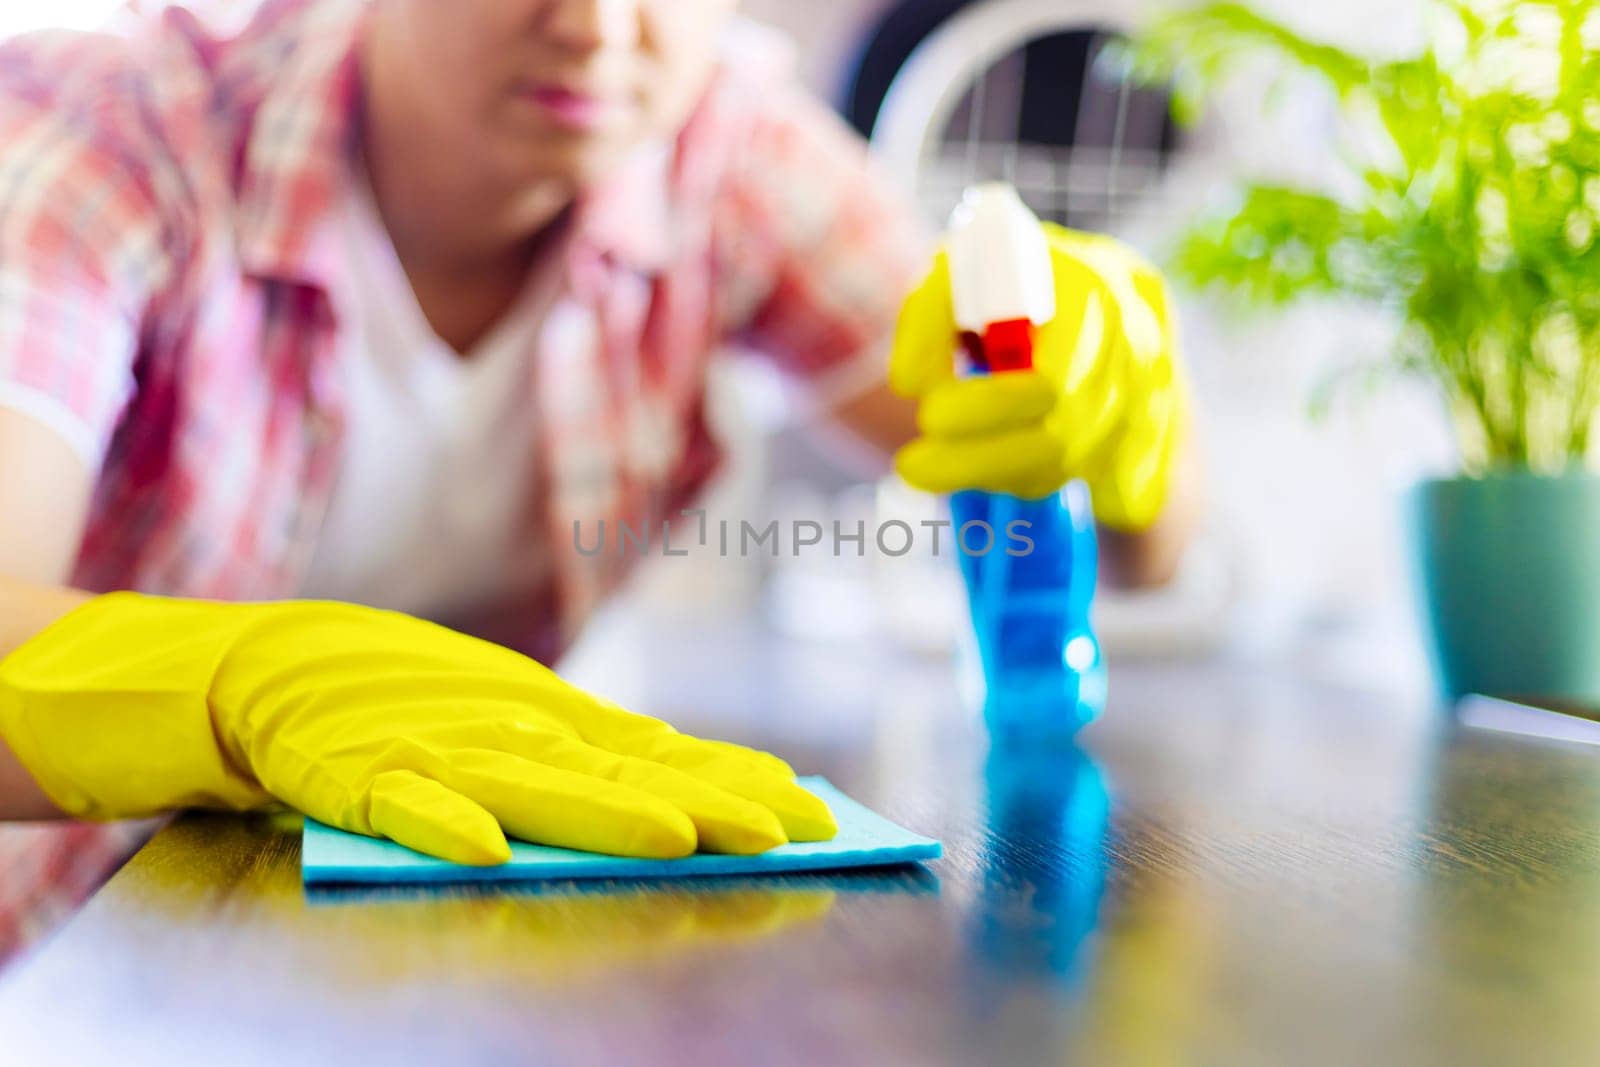 Housewife in yellow gloves wipes dust using spray detergent and rag by andreyz